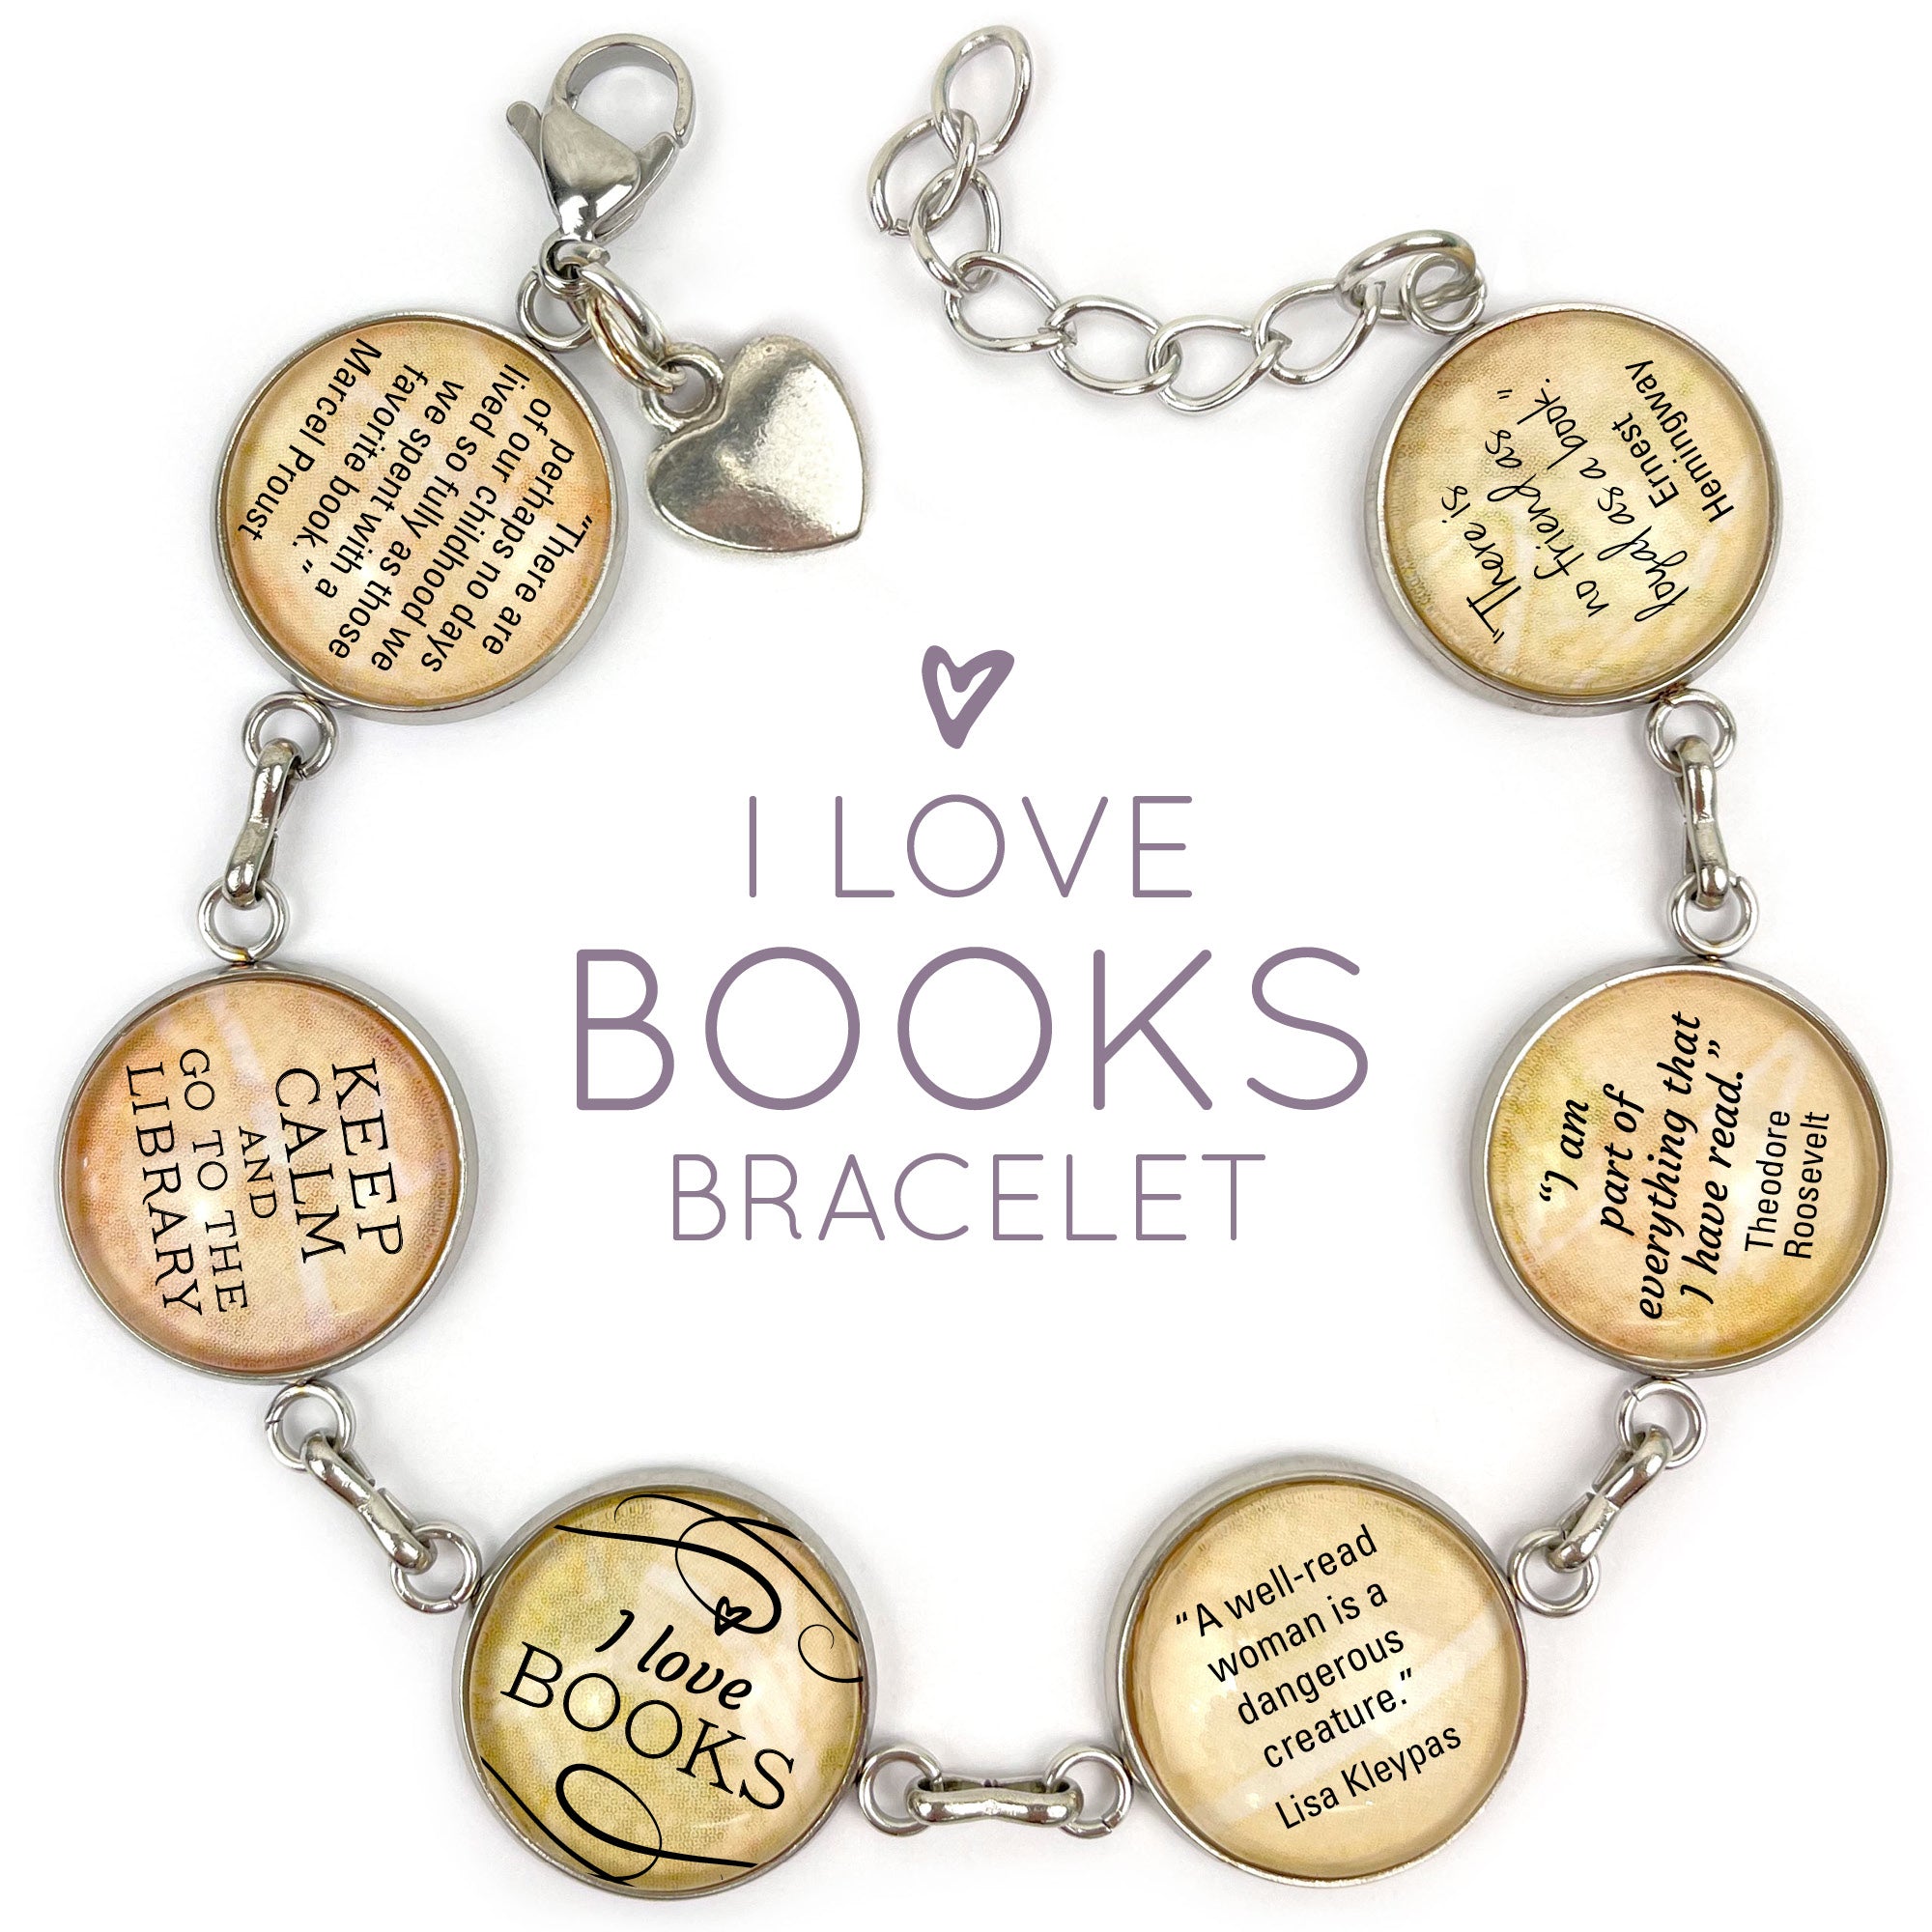 I Love Books Glass Charm Bracelet - Quotes from Famous Authors, Gift for Book Lovers - Bracelets - Bijou Her -  -  - 